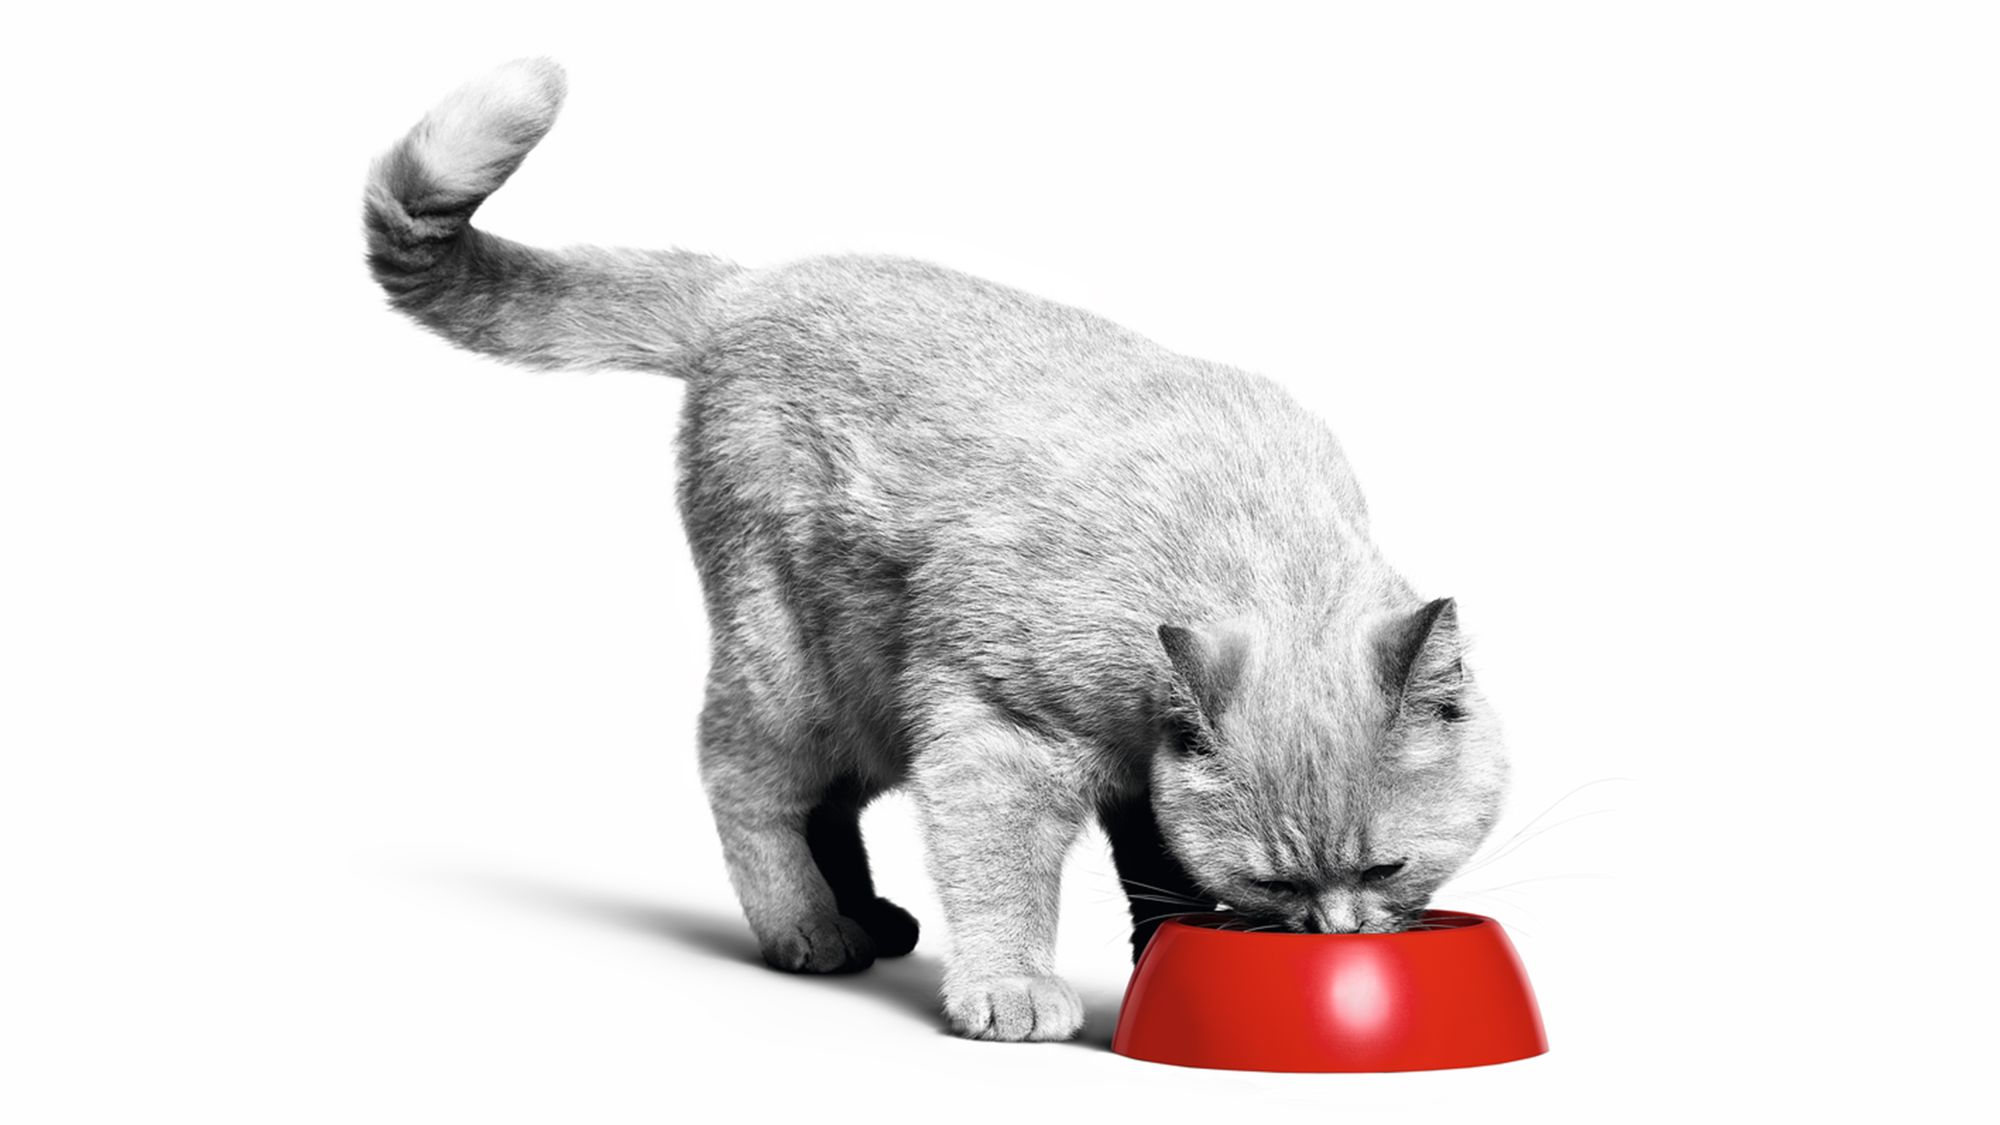 British Shorthair eating from a red bowl